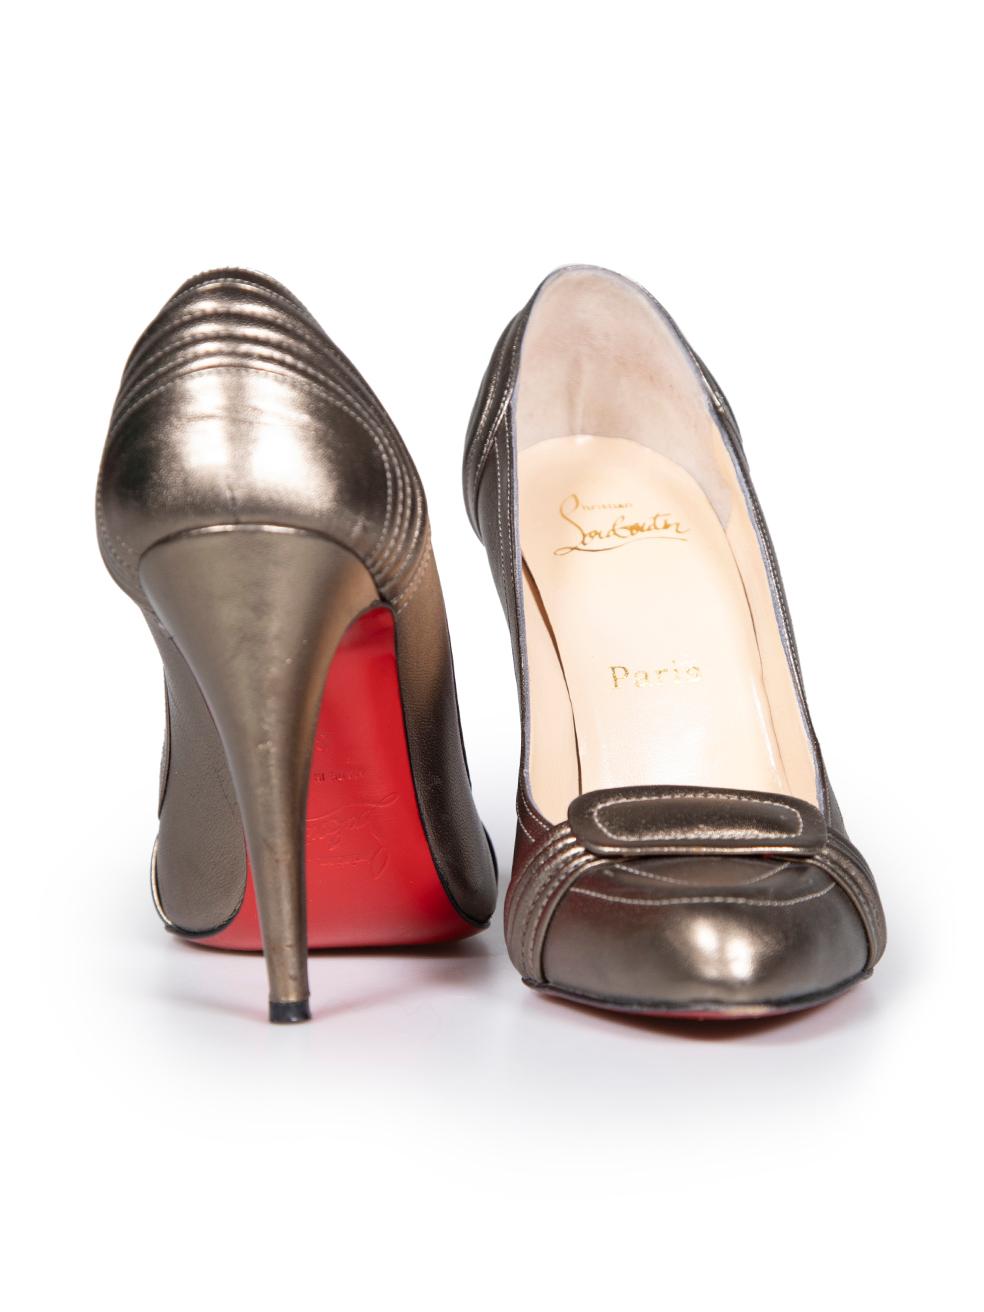 Christian Louboutin Taupe Leather Metallic Gattaca 100 Pumps Size IT 39 In Good Condition For Sale In London, GB